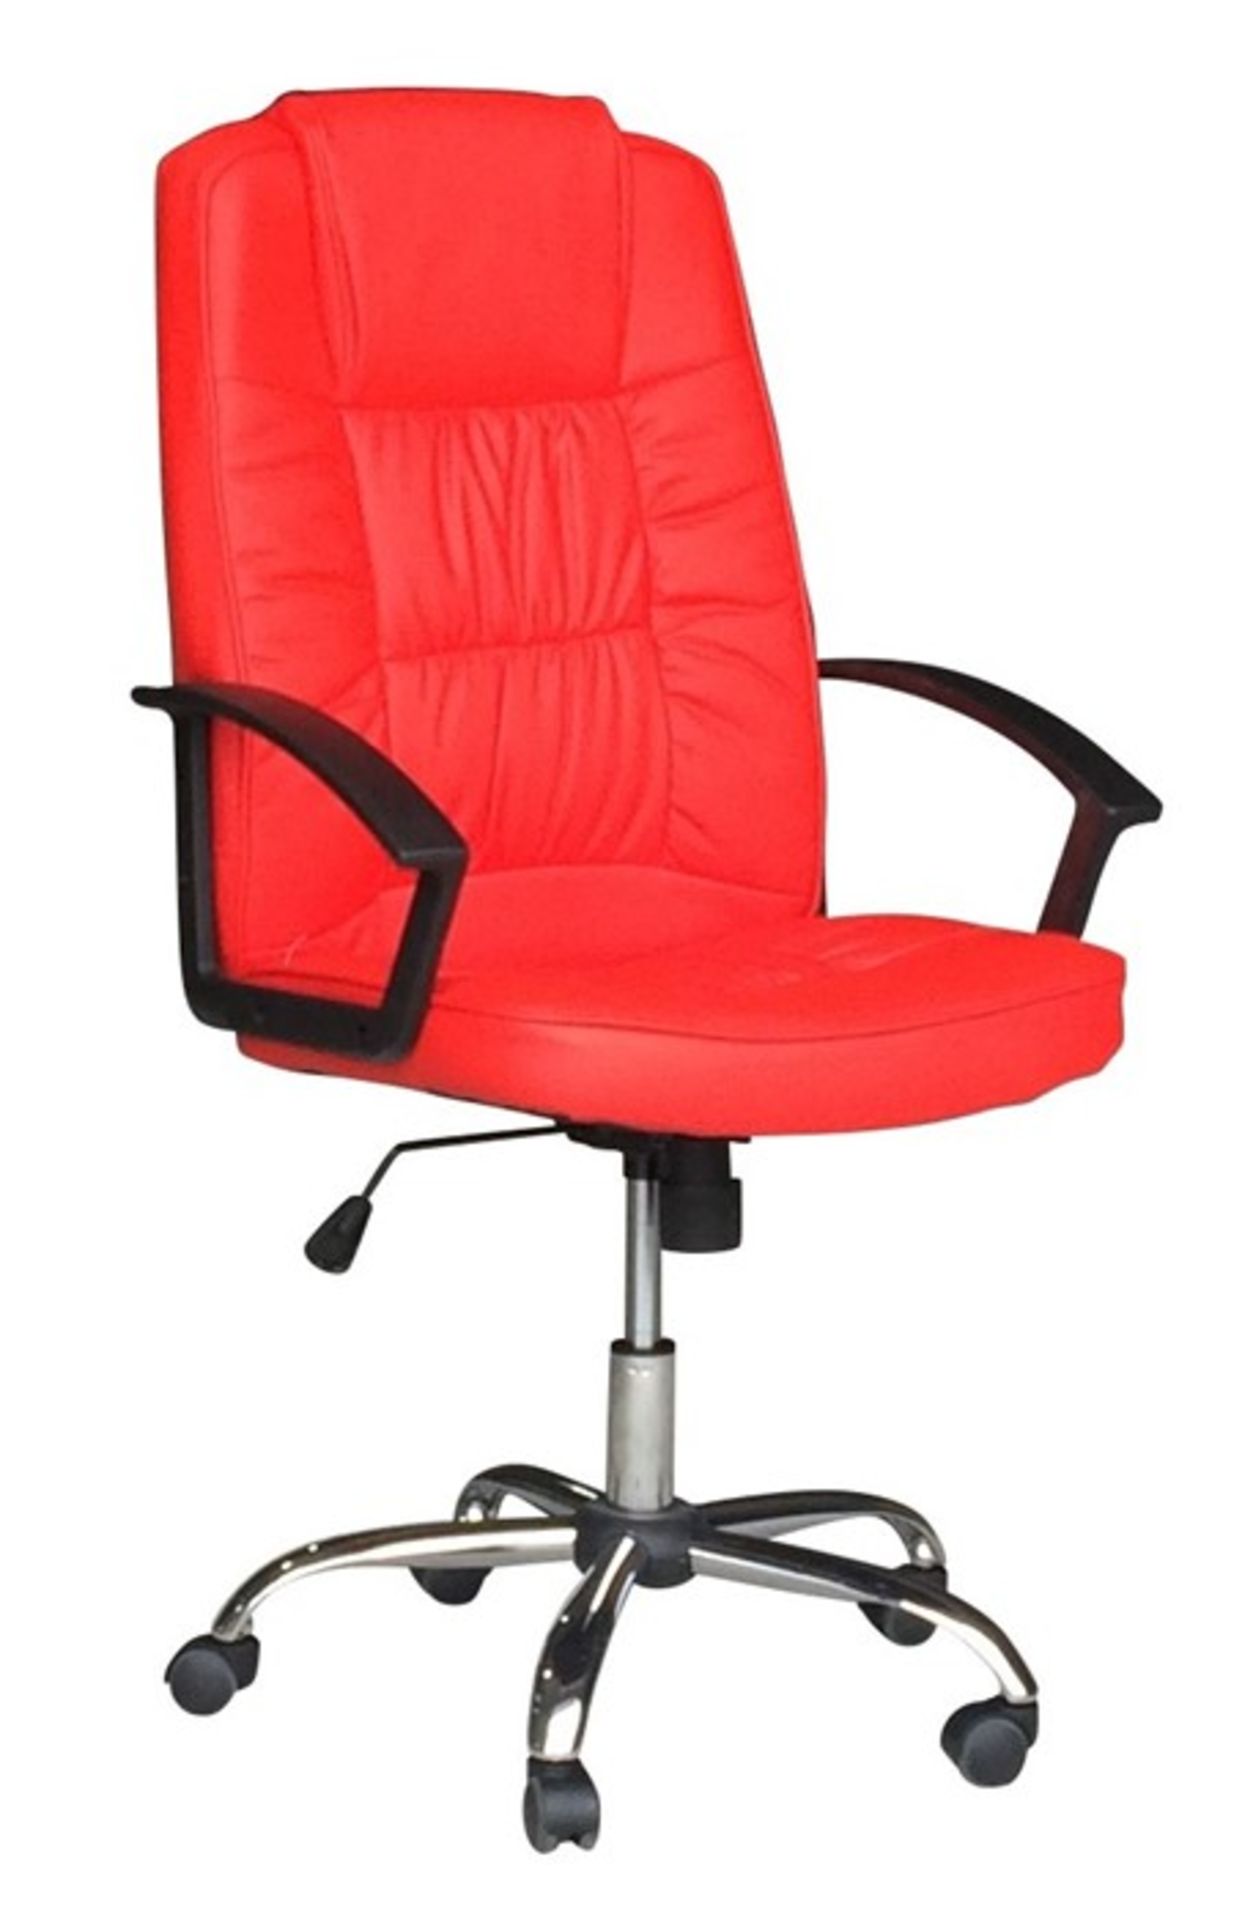 1 BRAND NEW BOXED RED LEATHER PU EXECUTIVE OPERATORS CHAIR OCR007RED (VIEWING HIGHLY RECOMMENDED)